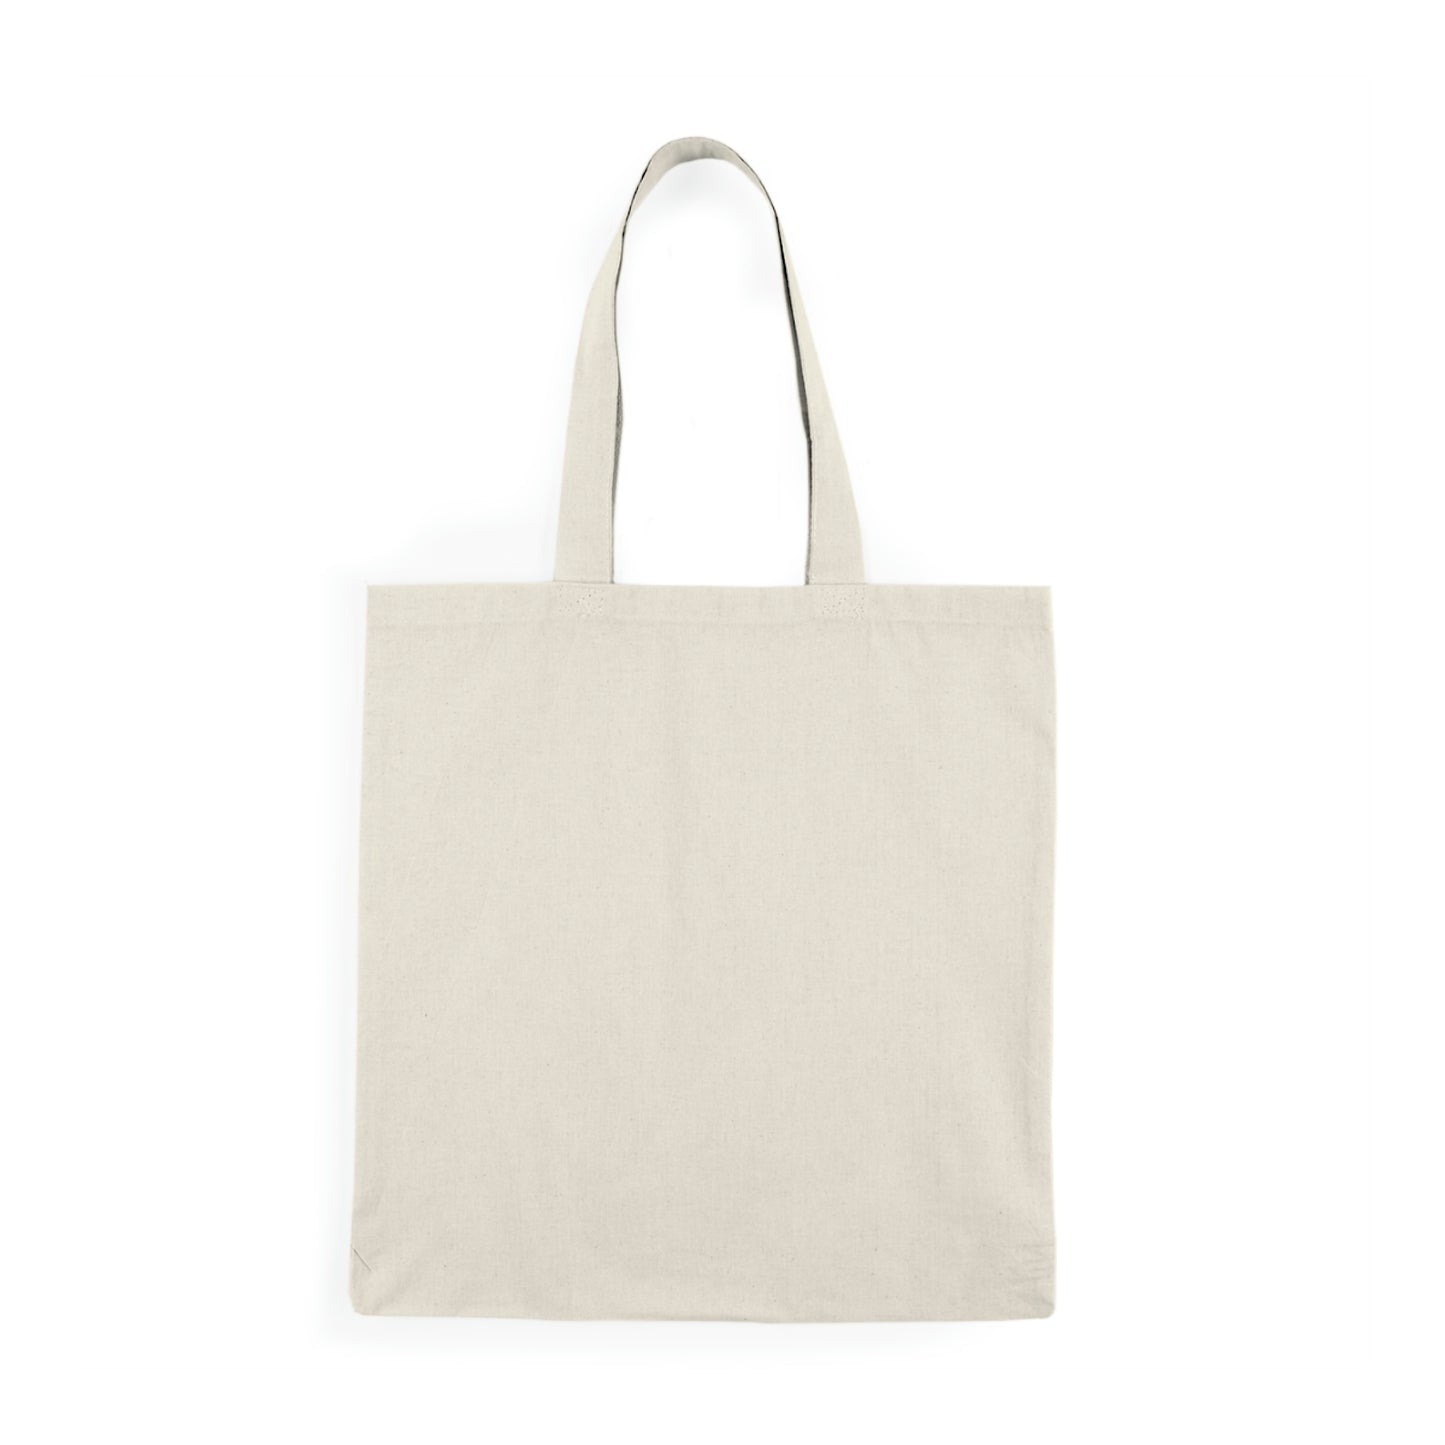 When Links / Blanks / Puzzles Linger - Natural Tote Bag